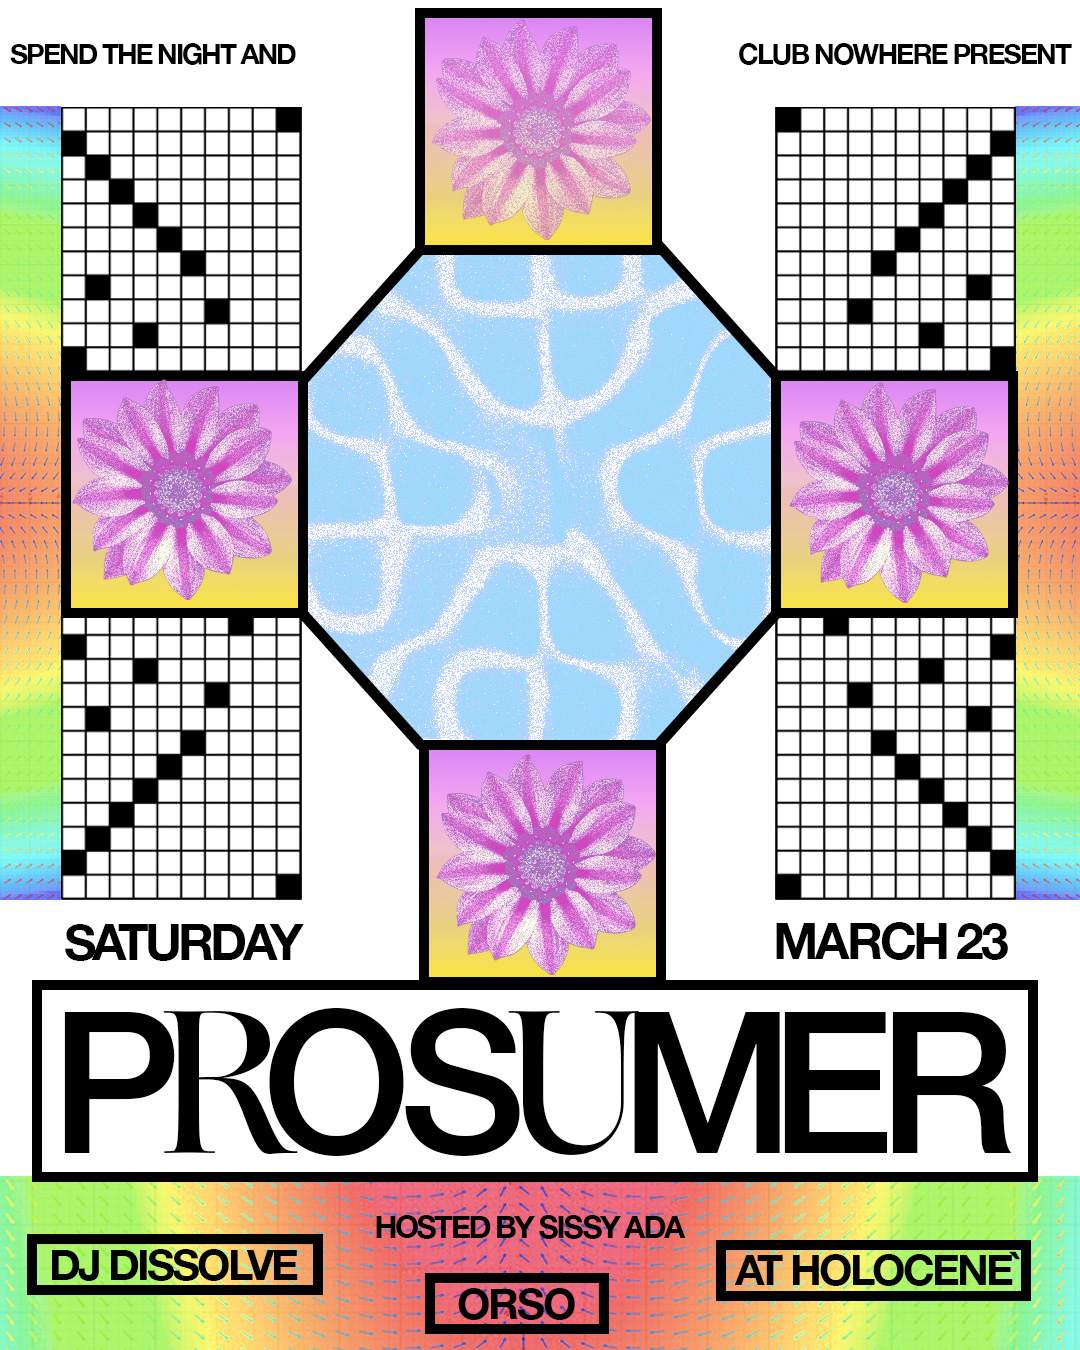 Spend The Night and Club Nowhere present: Prosumer, DJ DISSOLVE, ORSO, HOSTED BY SISSY ADA - Página frontal